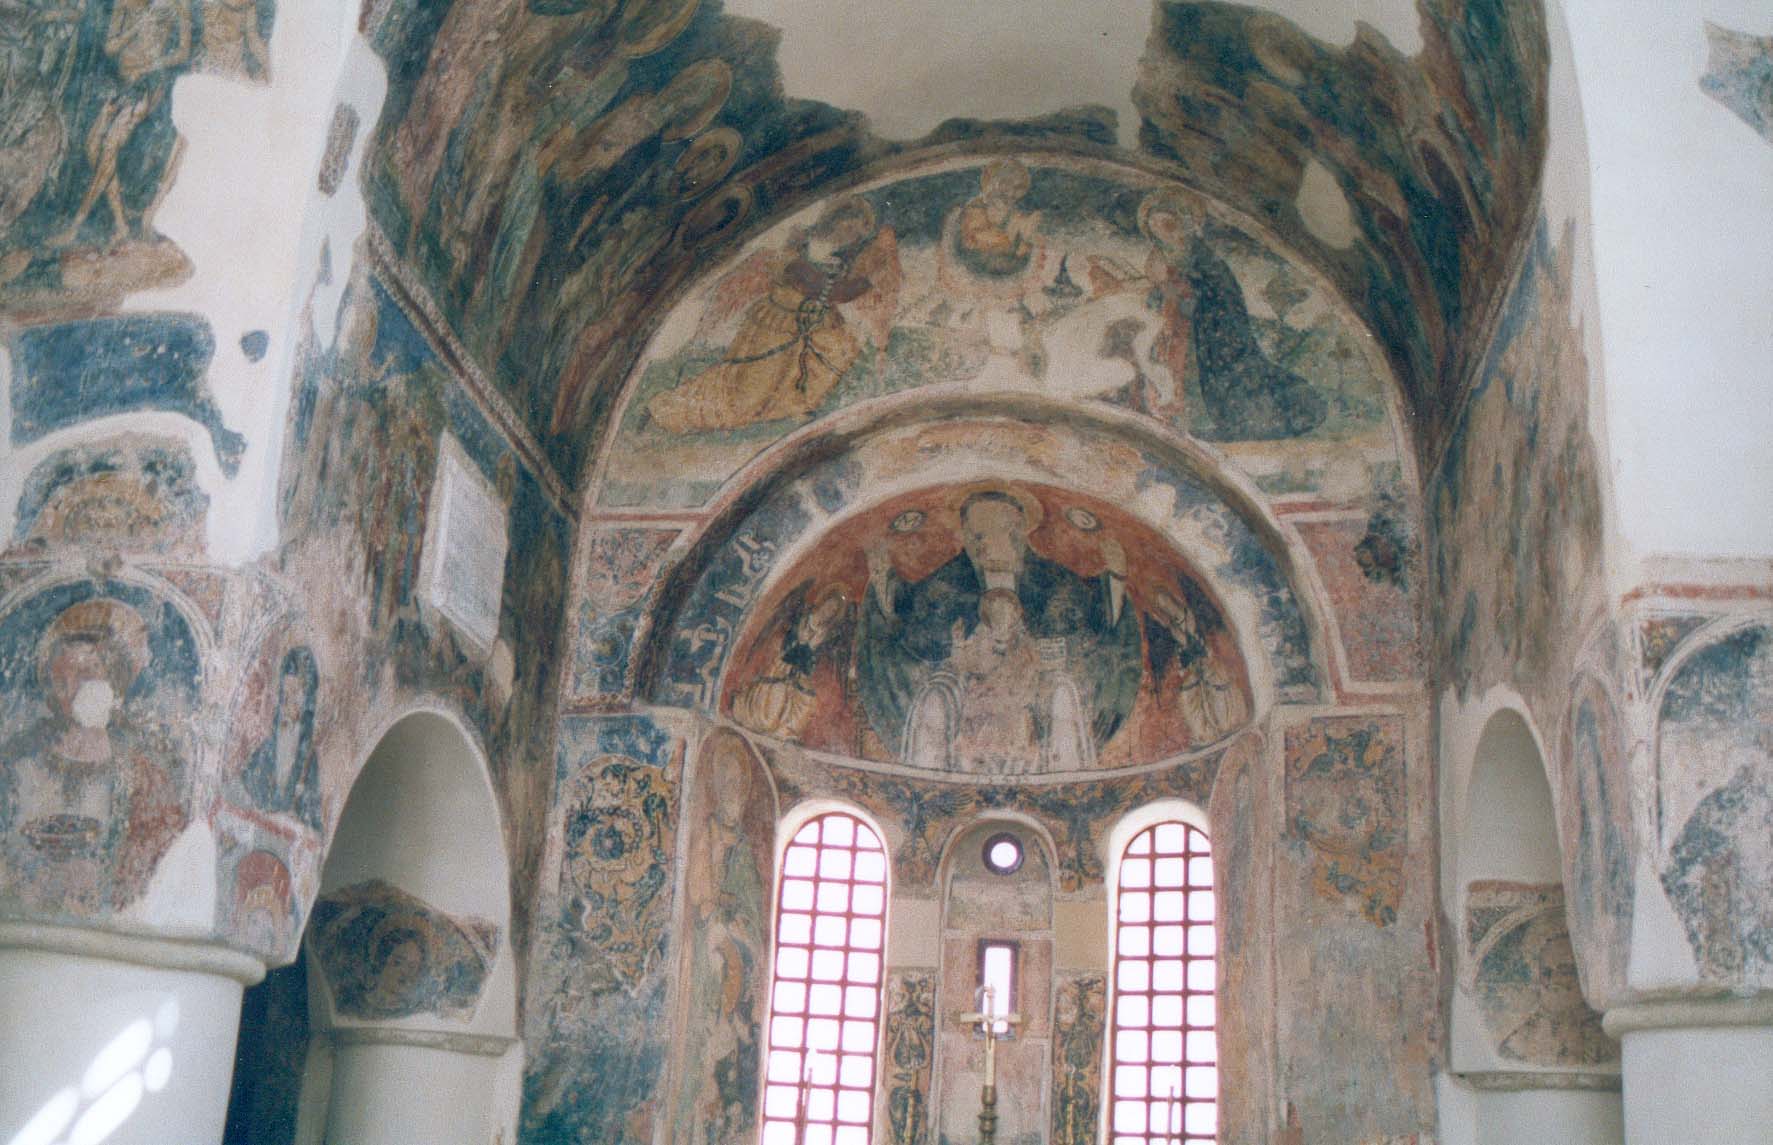 Frescos in Puglia cathedral ceiling